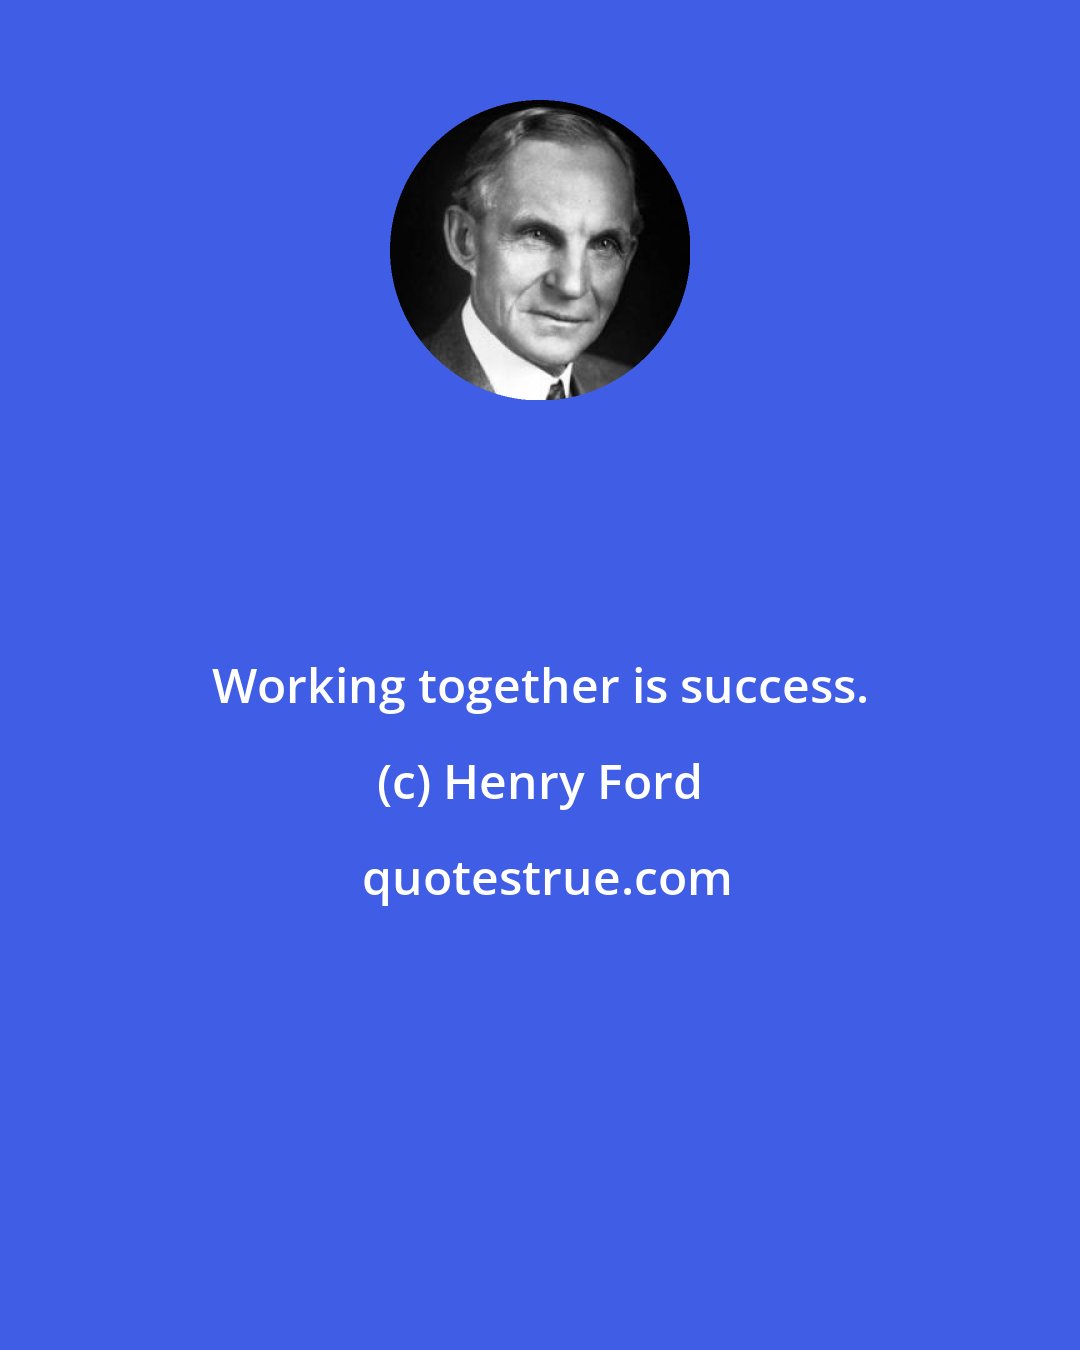 Henry Ford: Working together is success.